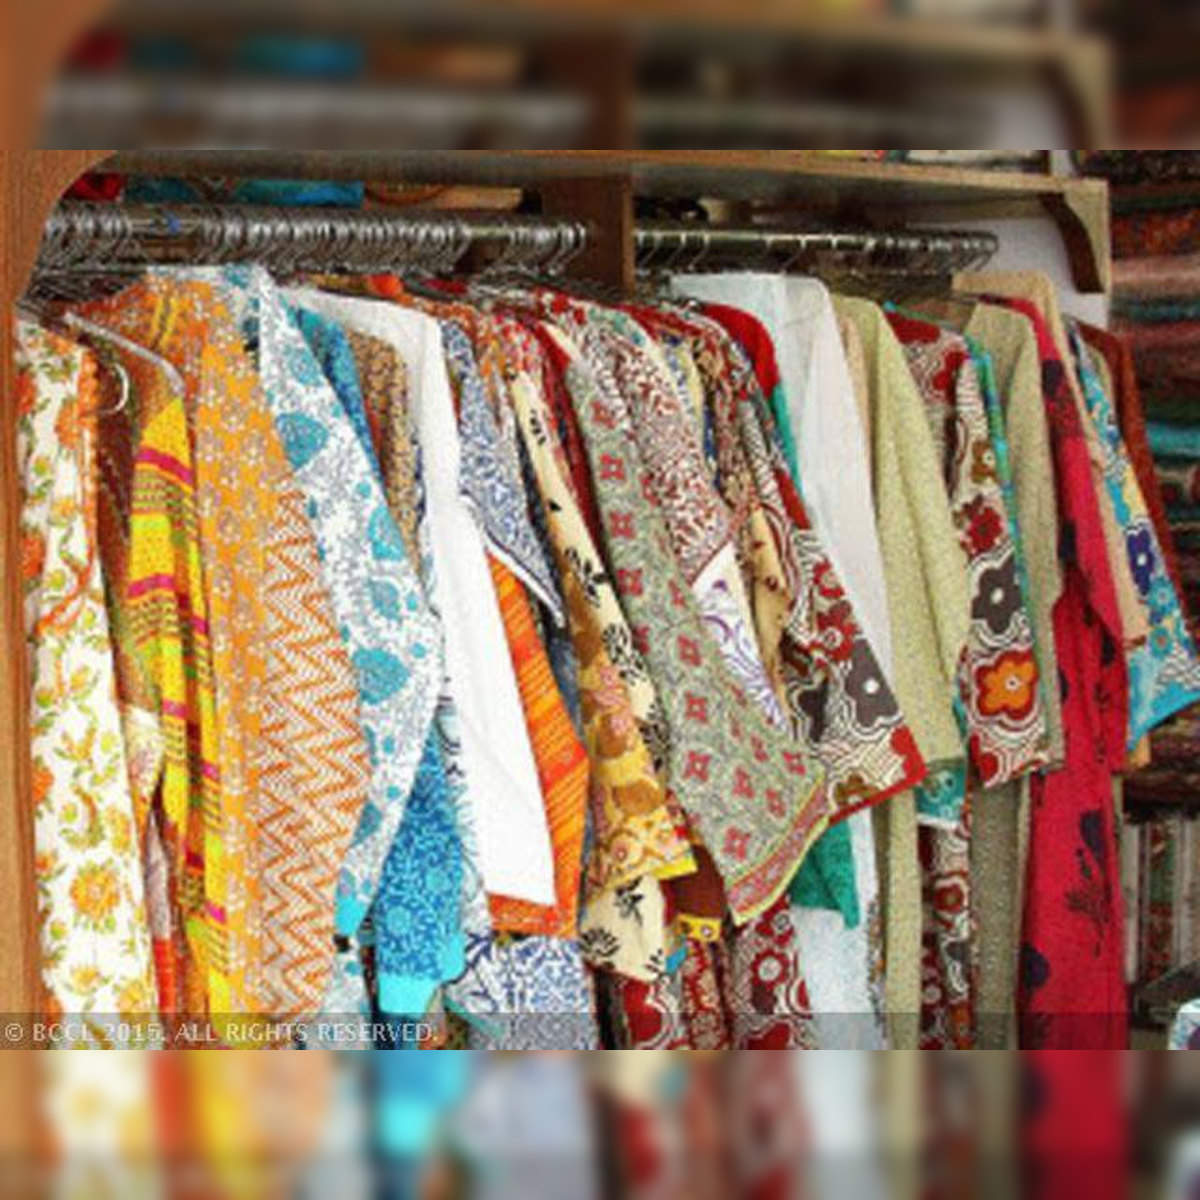 Women's ethnic wear tailors growth - The Economic Times